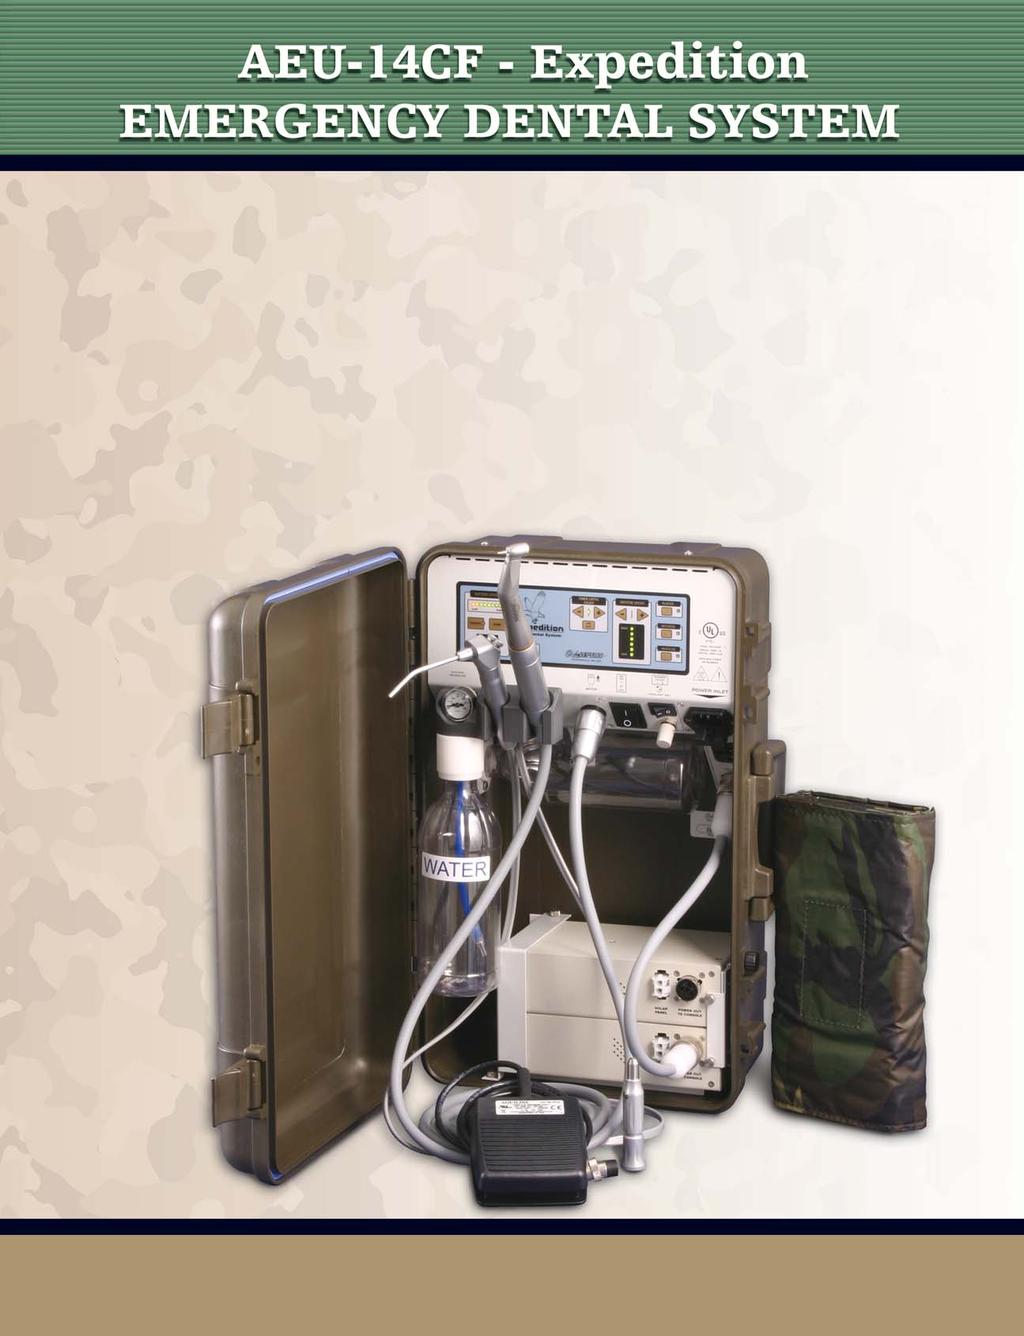 In response to the Military s demand for an ultra lightweight, battery powered emergency dental unit, Aseptico has developed the AEU-14CF Expedition Field Dental System.